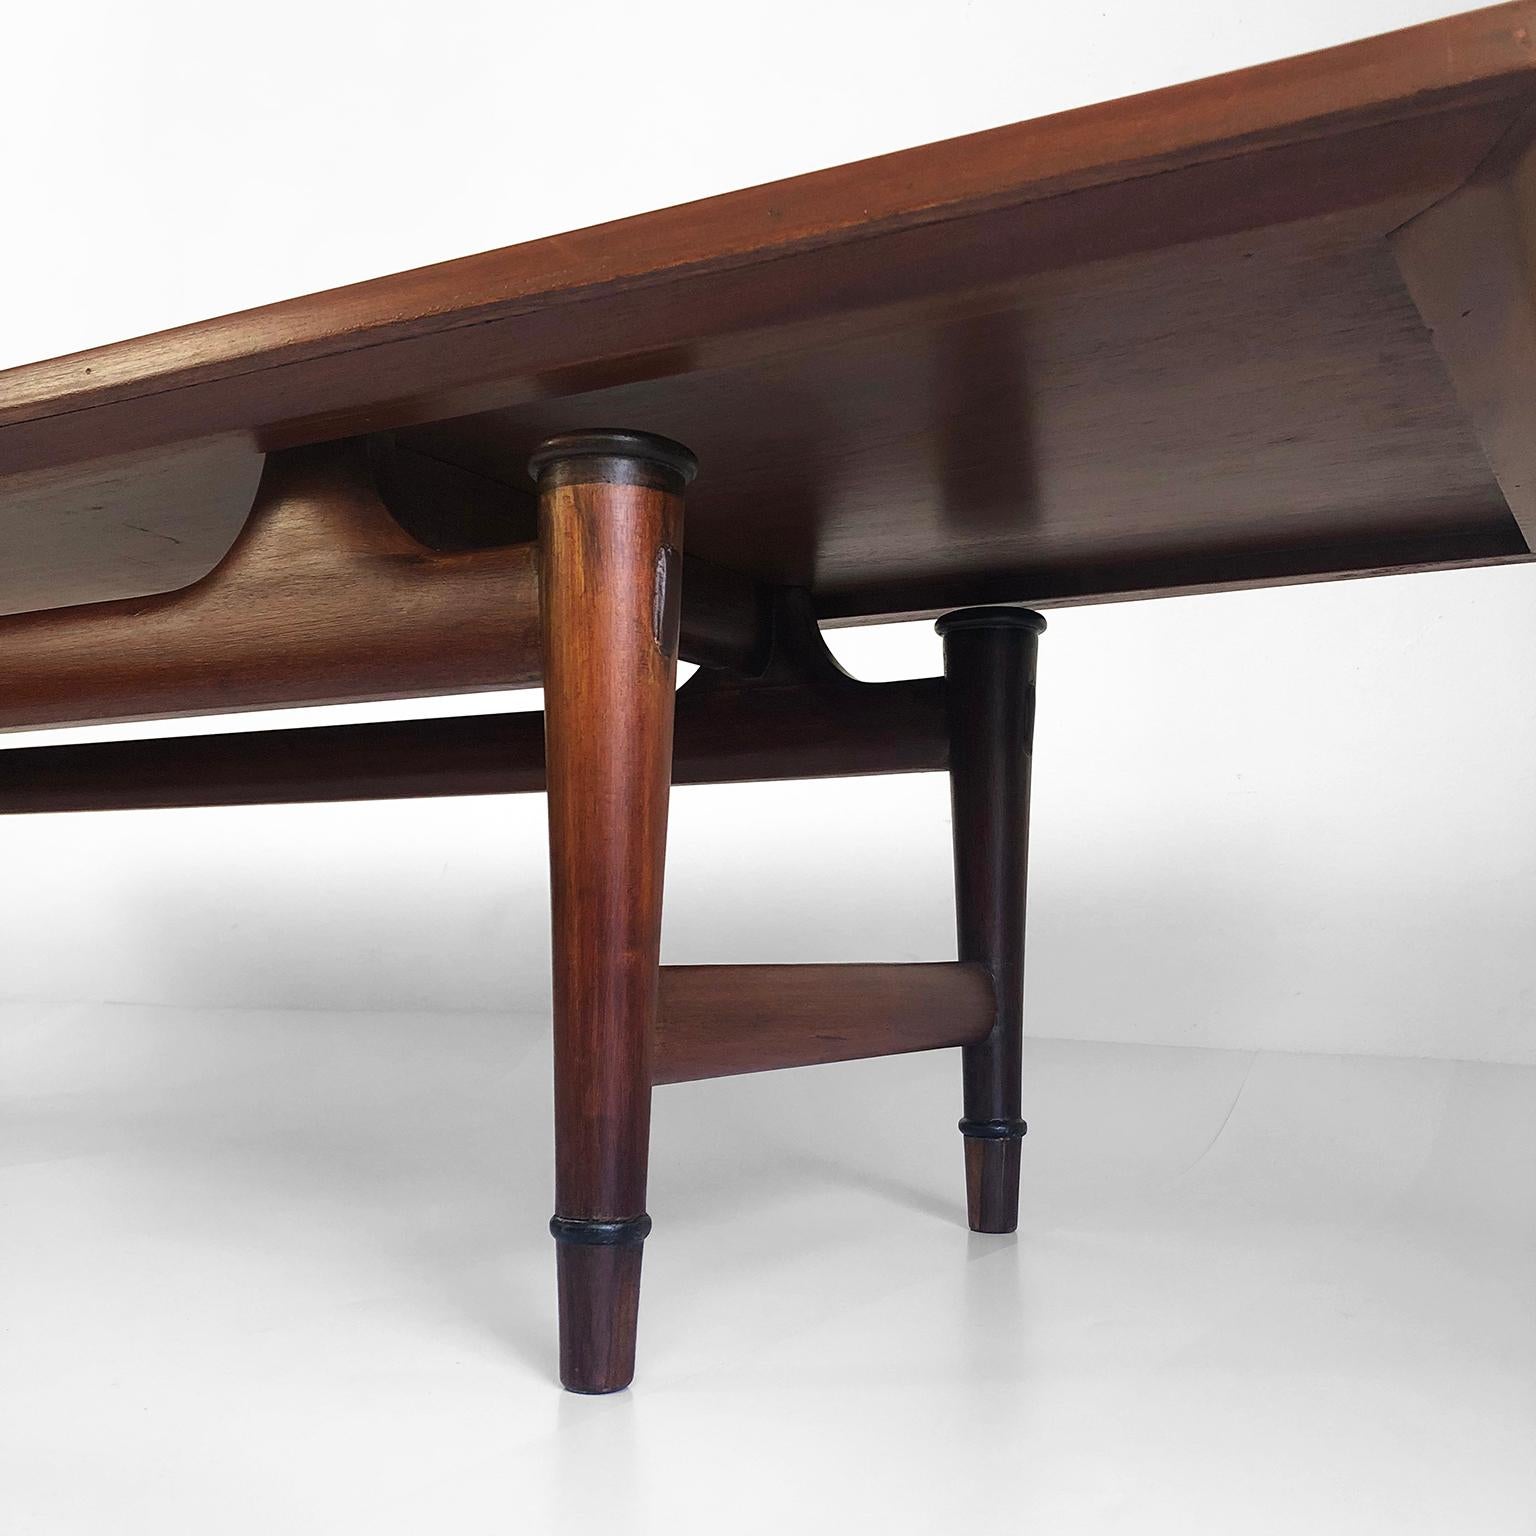 We offer this stunning large coffee table designed by Frank Kyle, circa 1950. The table has the most important characteristics and design lines of Frank Kyle such as the mixture of mahogany and tropical woods. A wonderful piece by one of the most